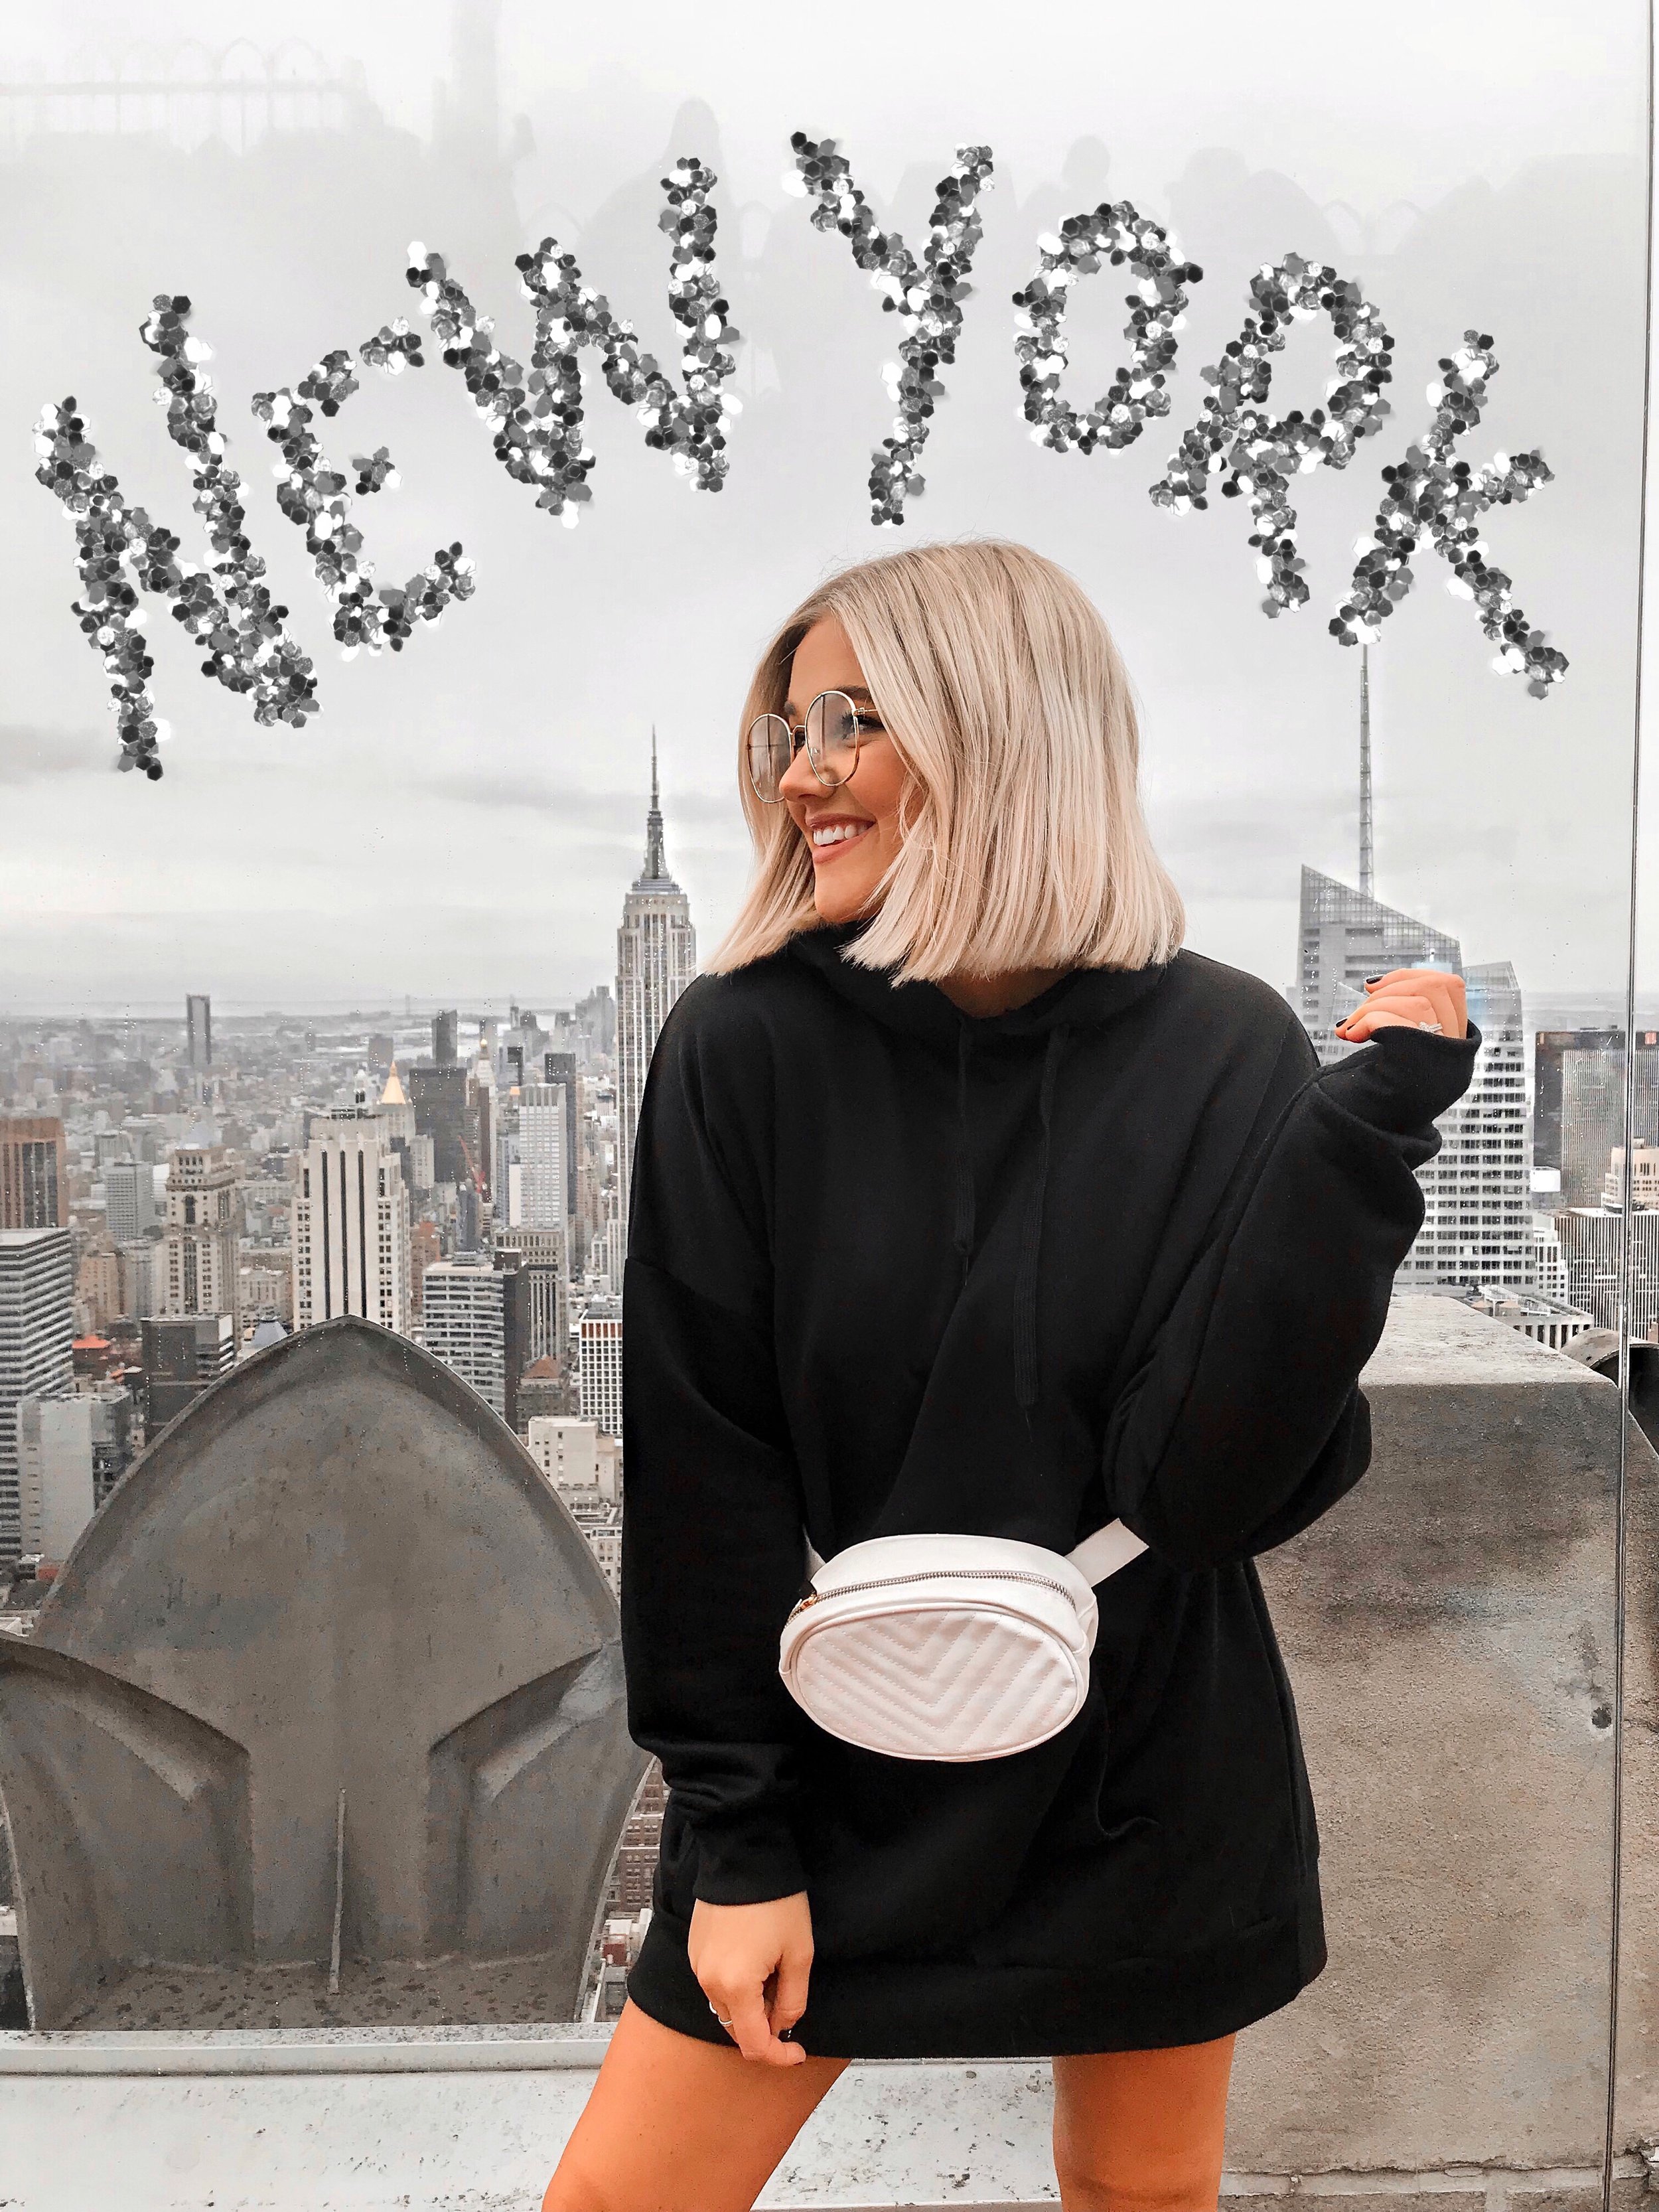 Bre Sheppard - My First NYFW - Top Of The Rock NYC.JPEG